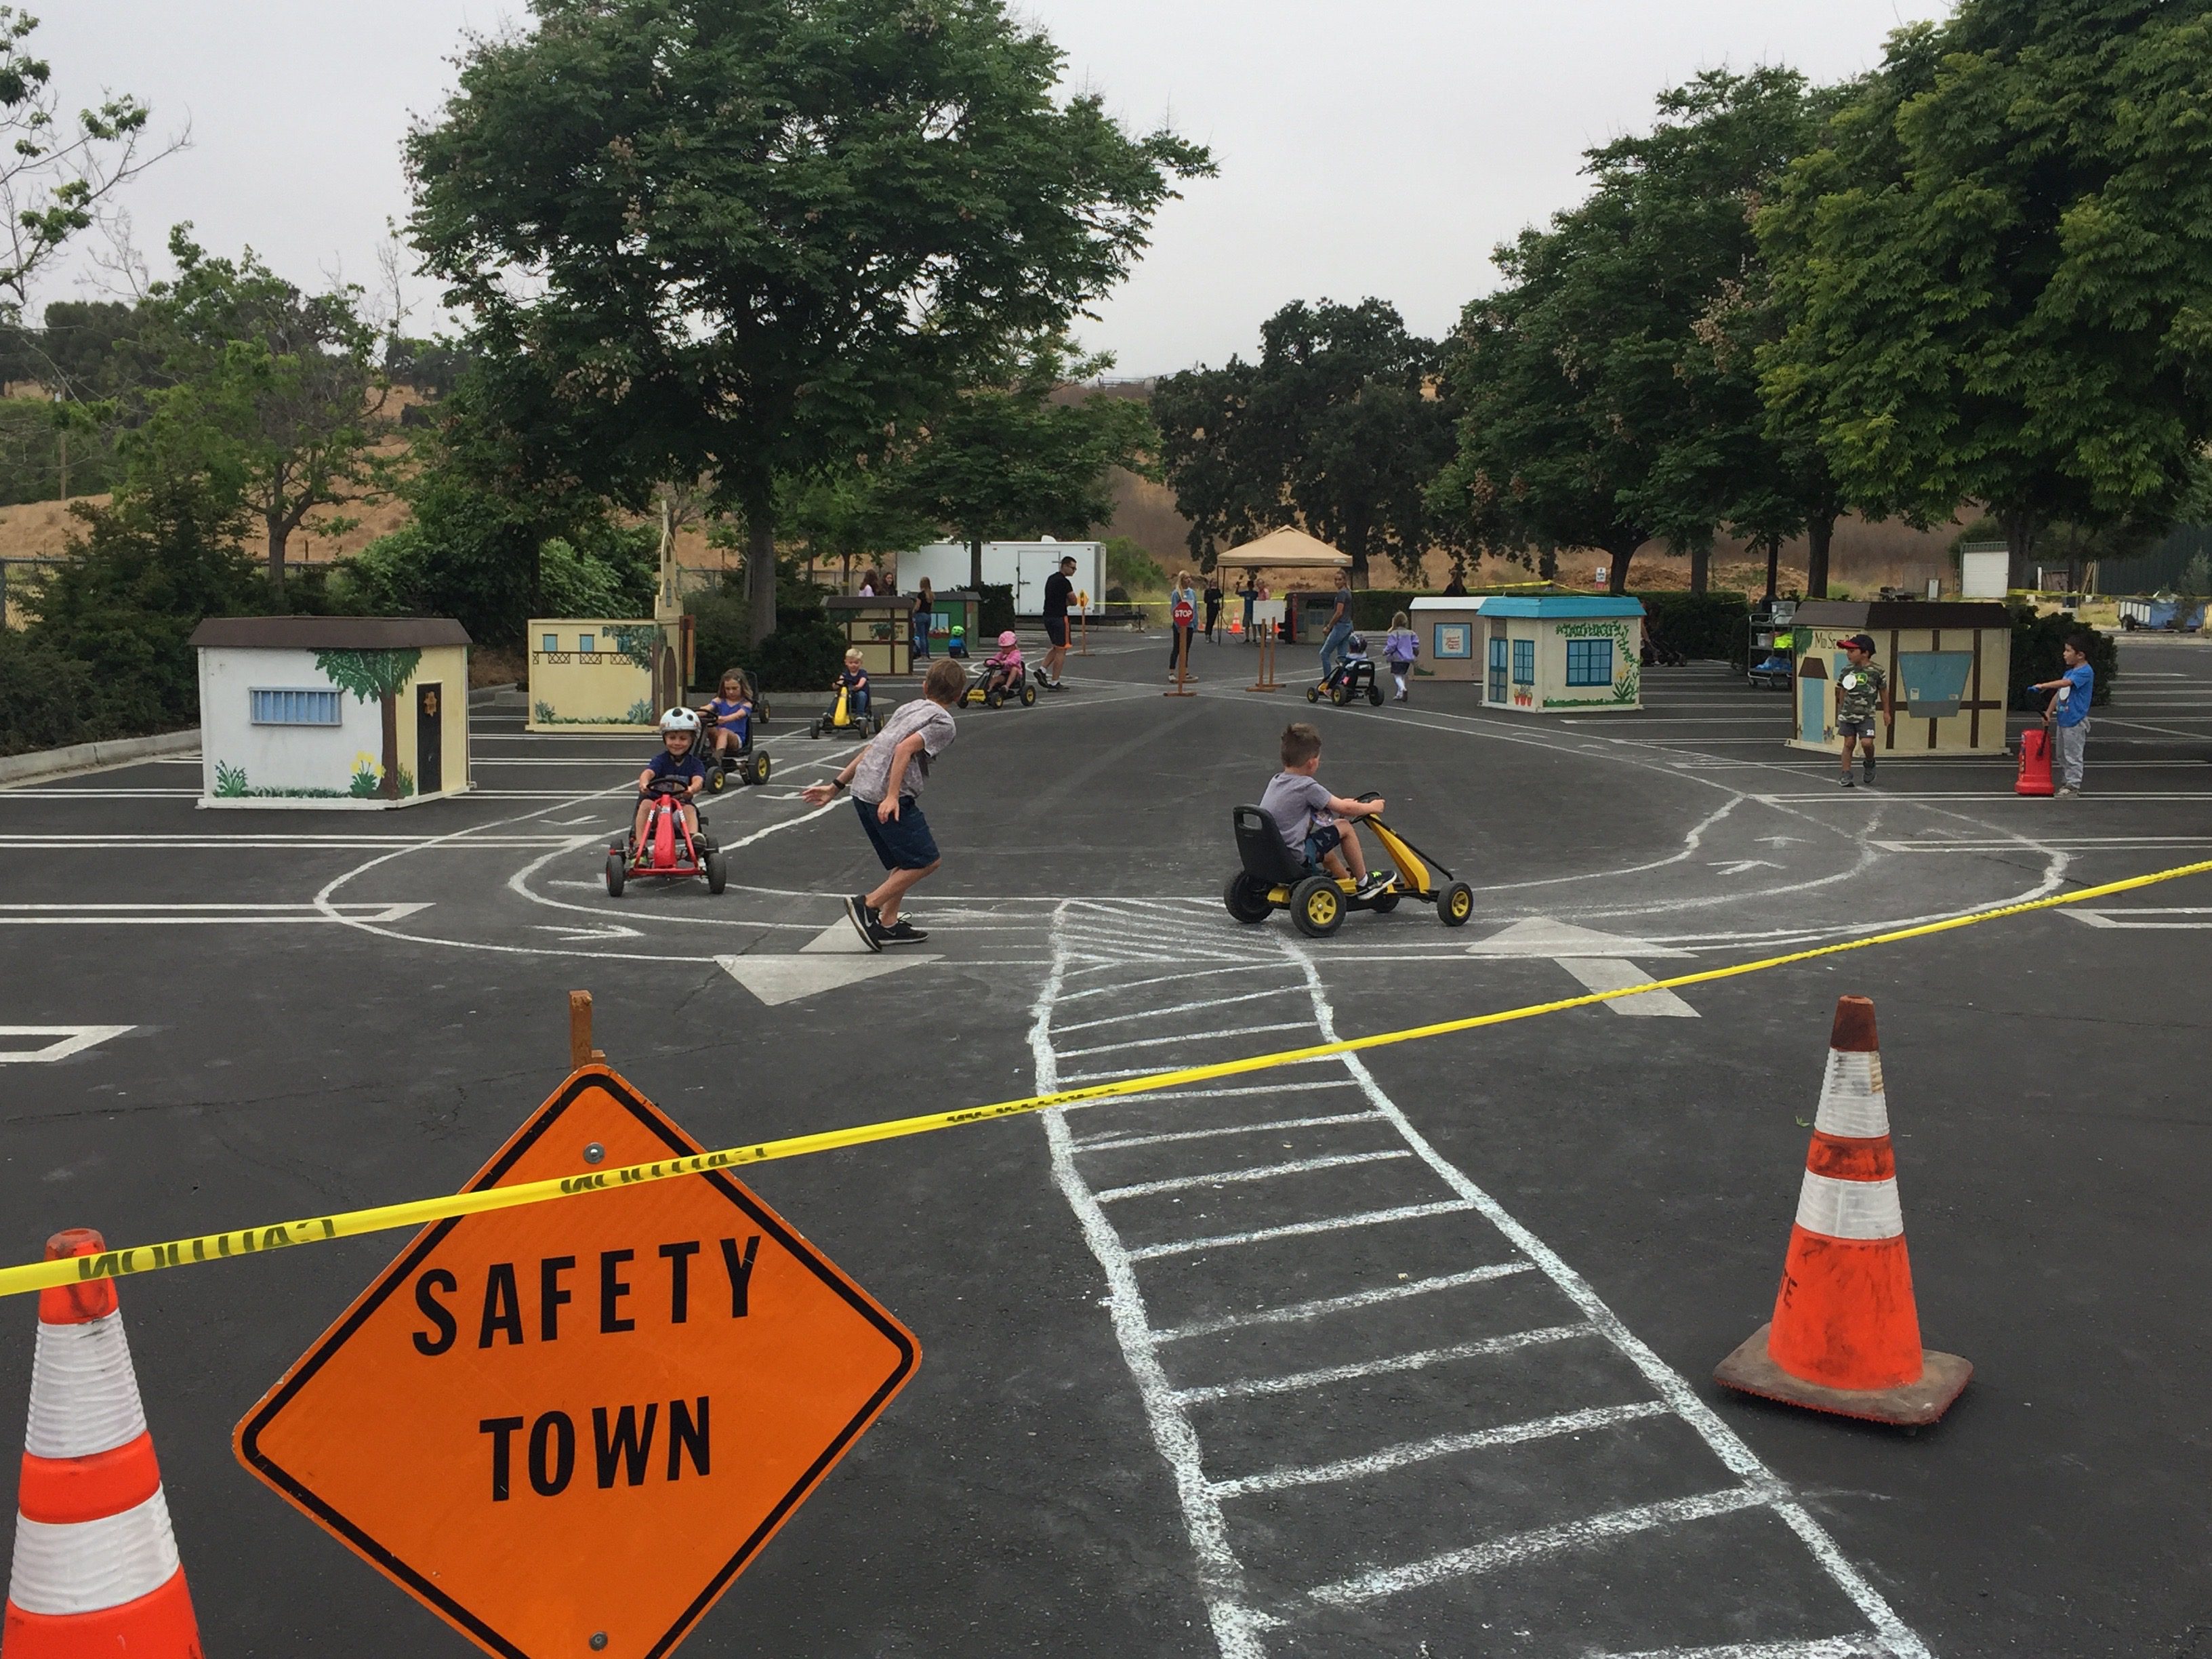 Eagle Scout project for Safety Town completed